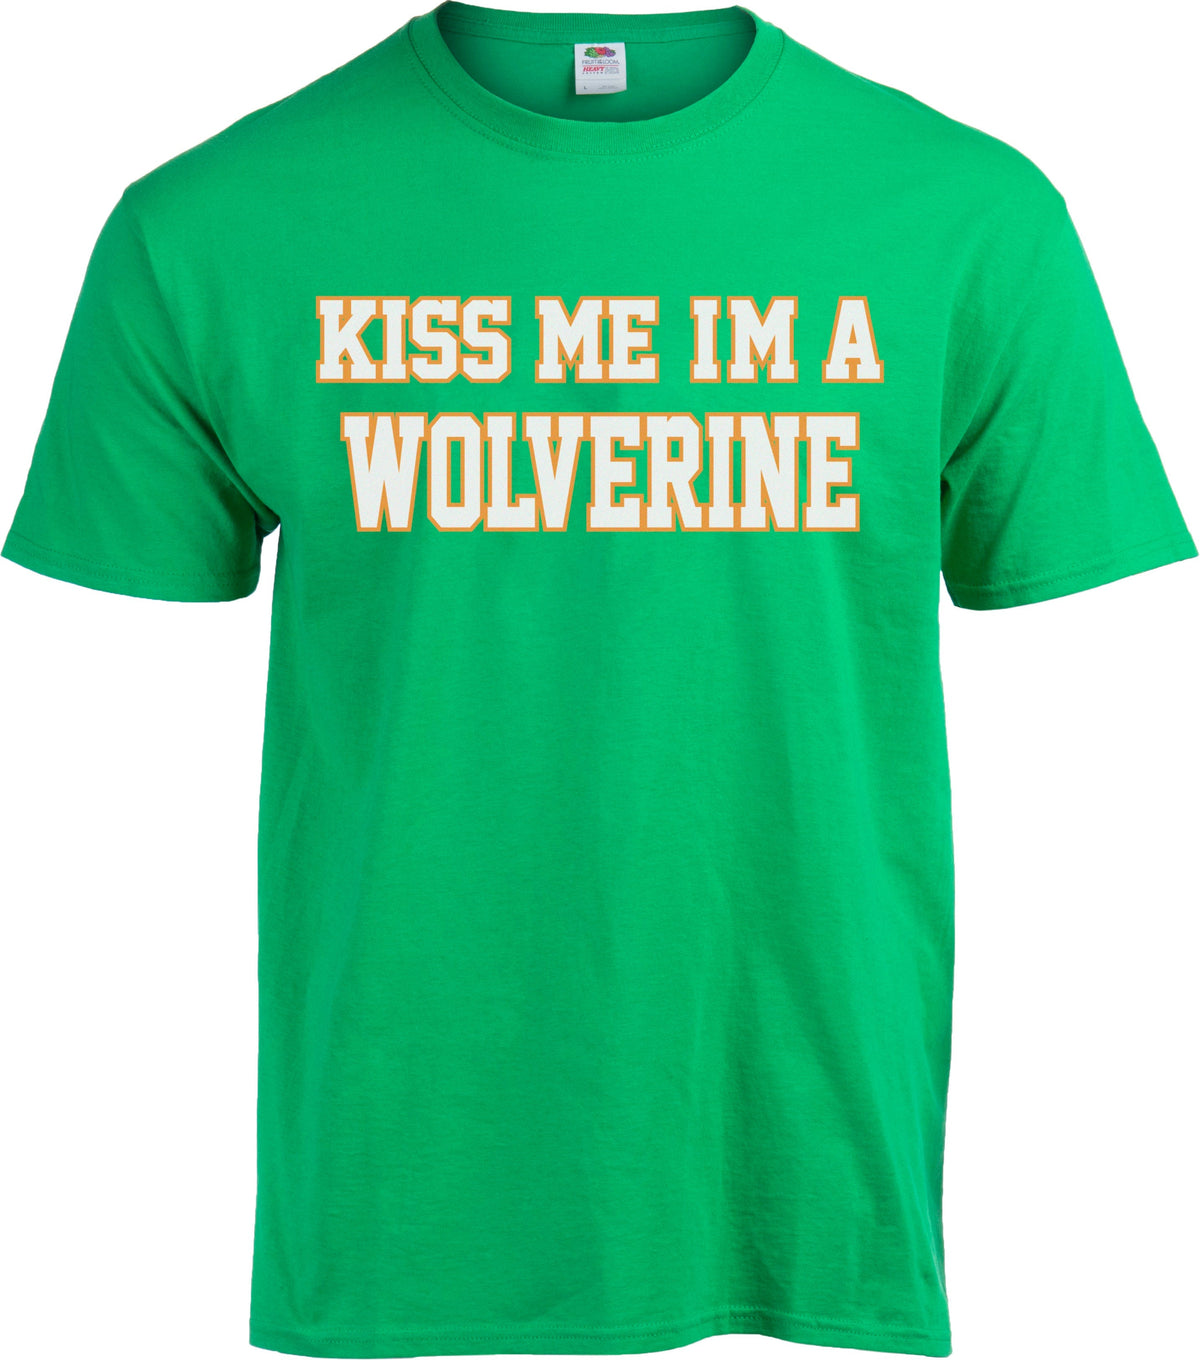 Kiss Me, I'm A Wolverine - St. Patrick's Day Ann Arbor Drunk T-shirt - Kid's/Youth